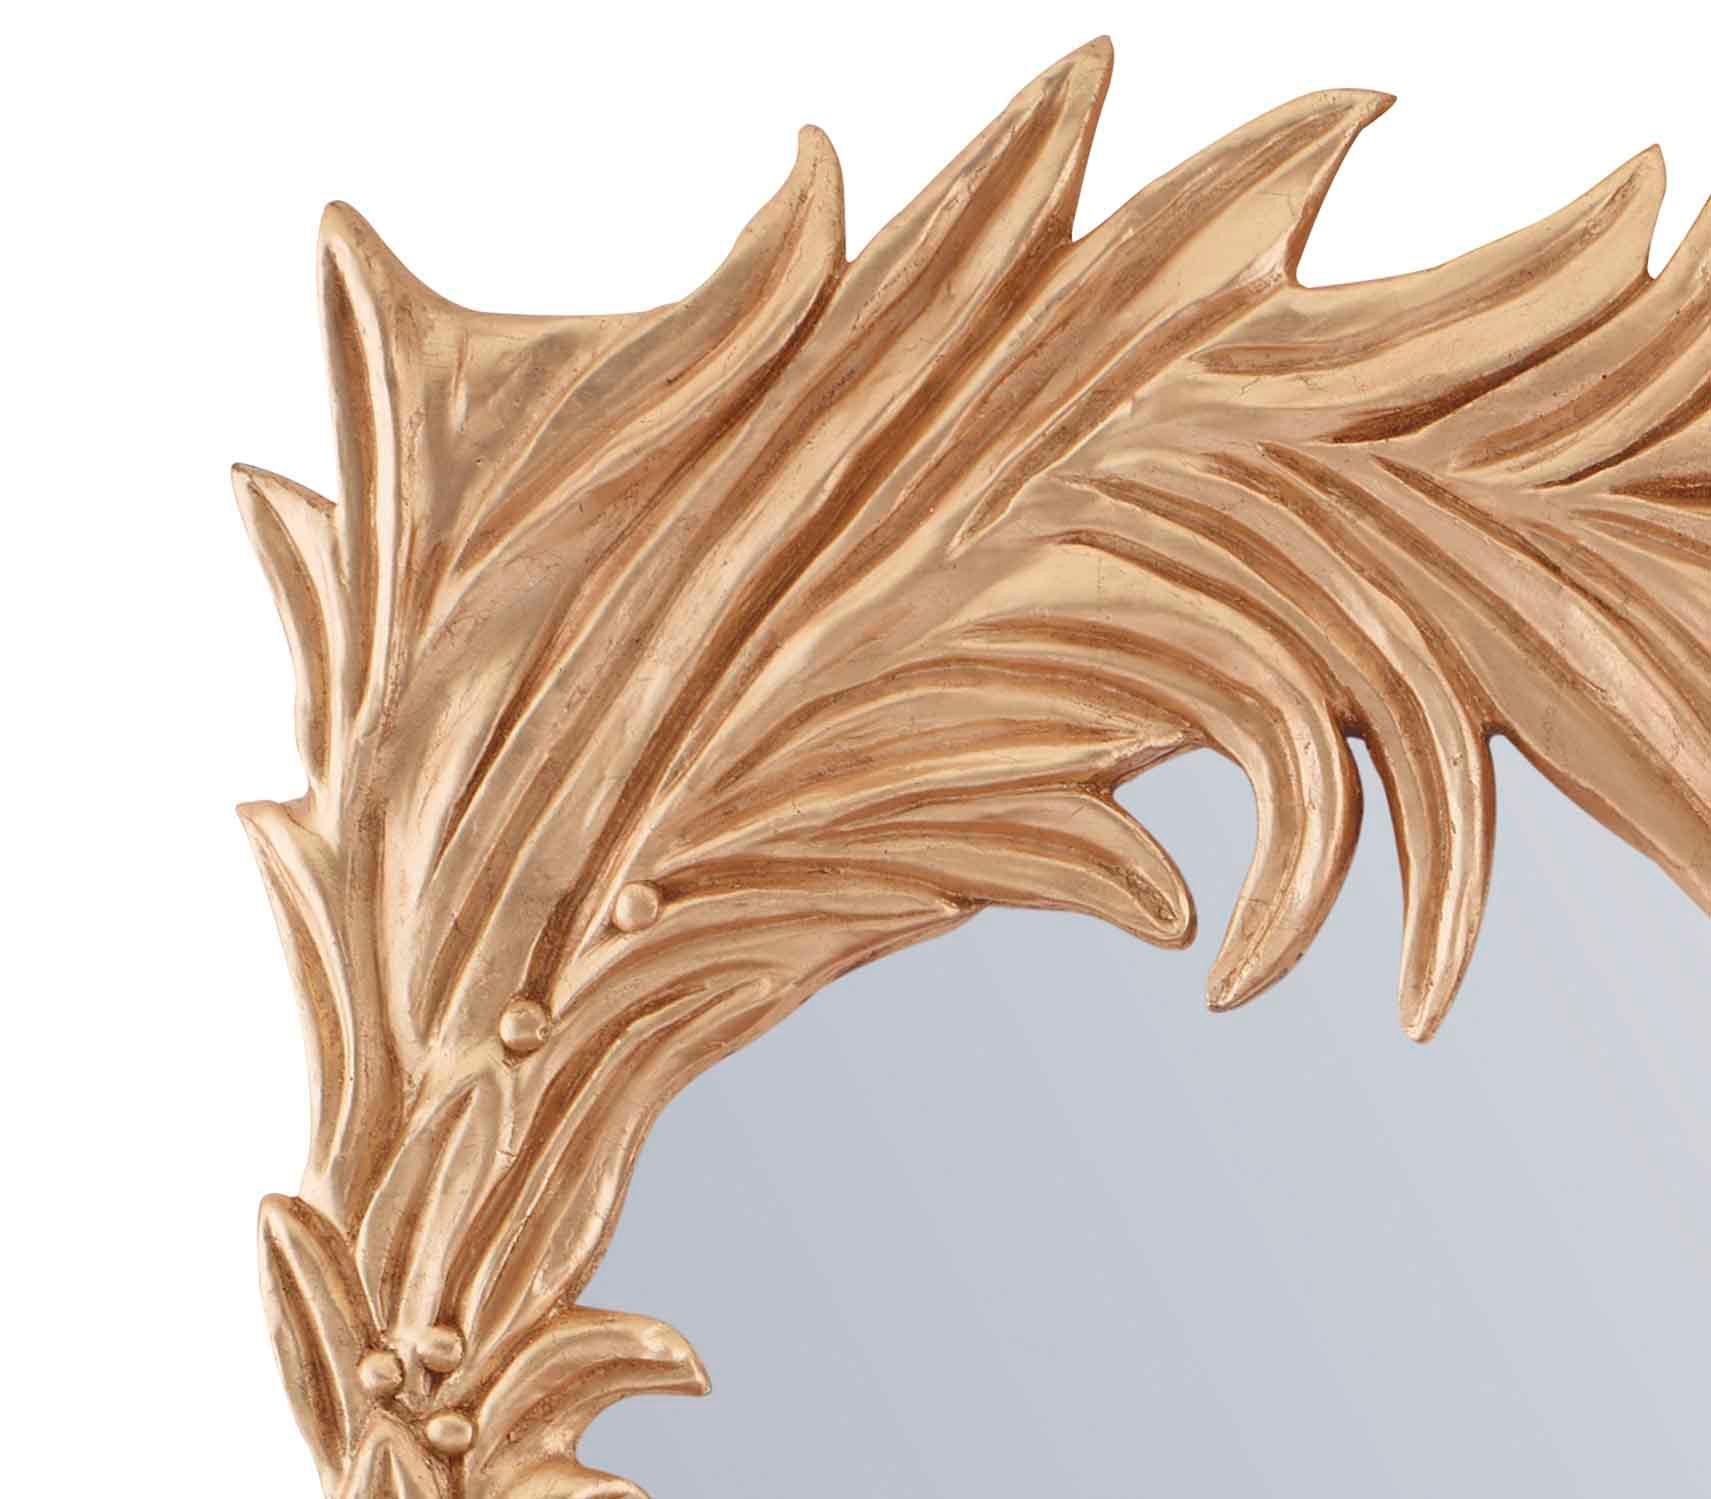 Gold (QR-17620.GOLD.0) Jan Showers Santa Monica Mirror with Feather Border for CuratedKravet 2